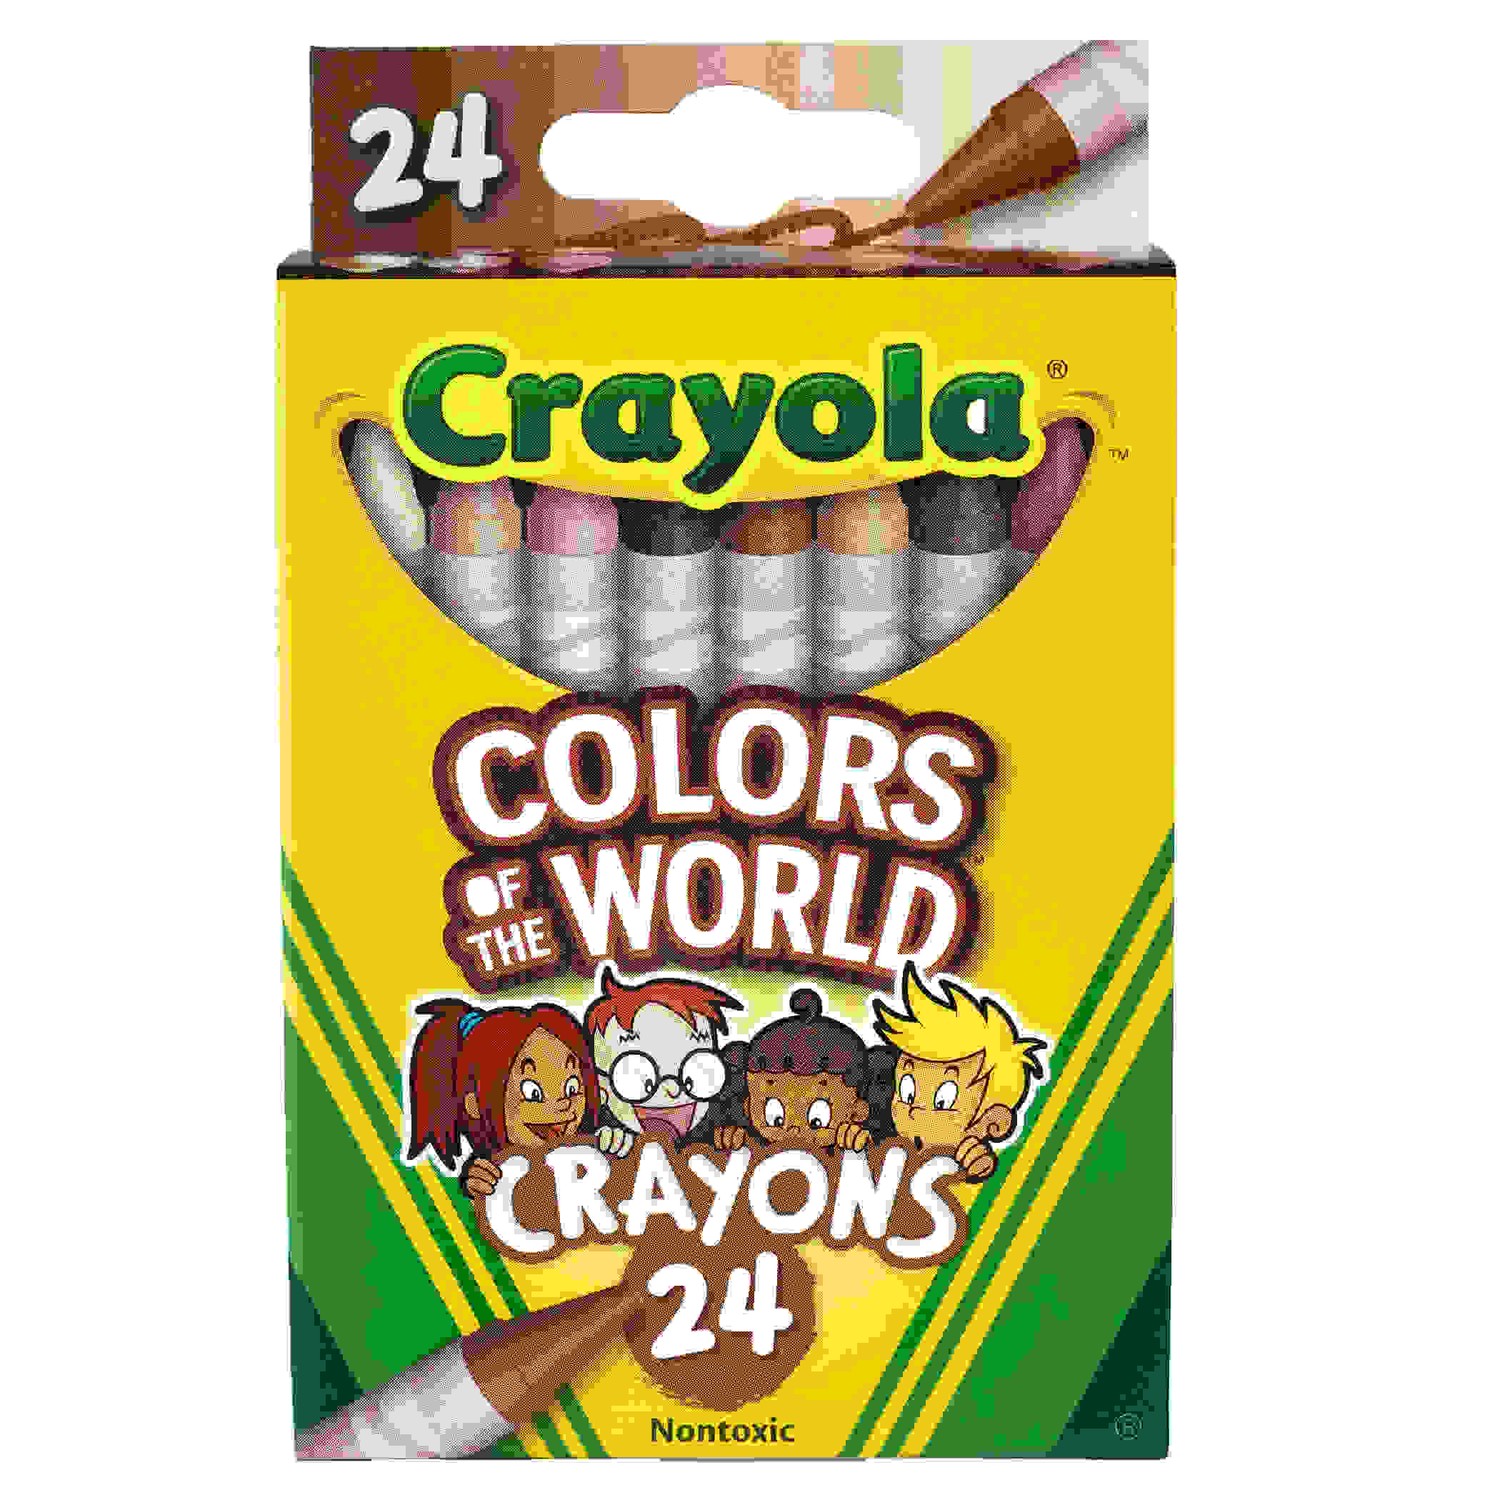 Colors of the World Crayons, 24 Colors